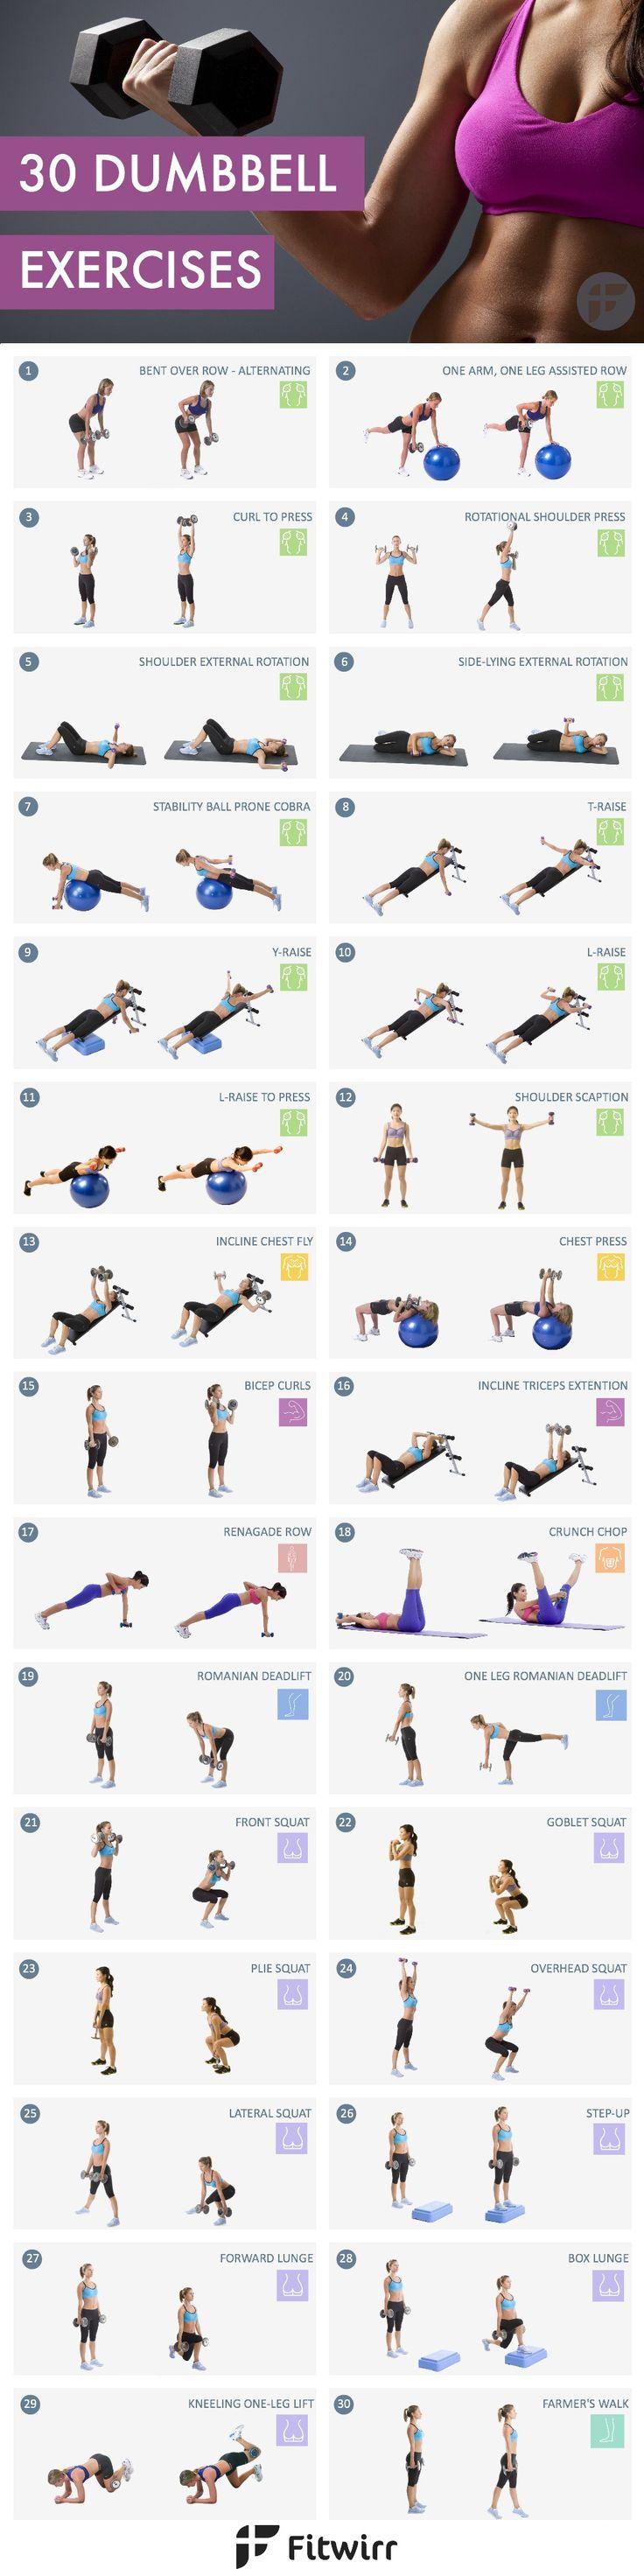 Wedding - Home Workouts: 30 Dumbbell Exercises For Women [Image List]